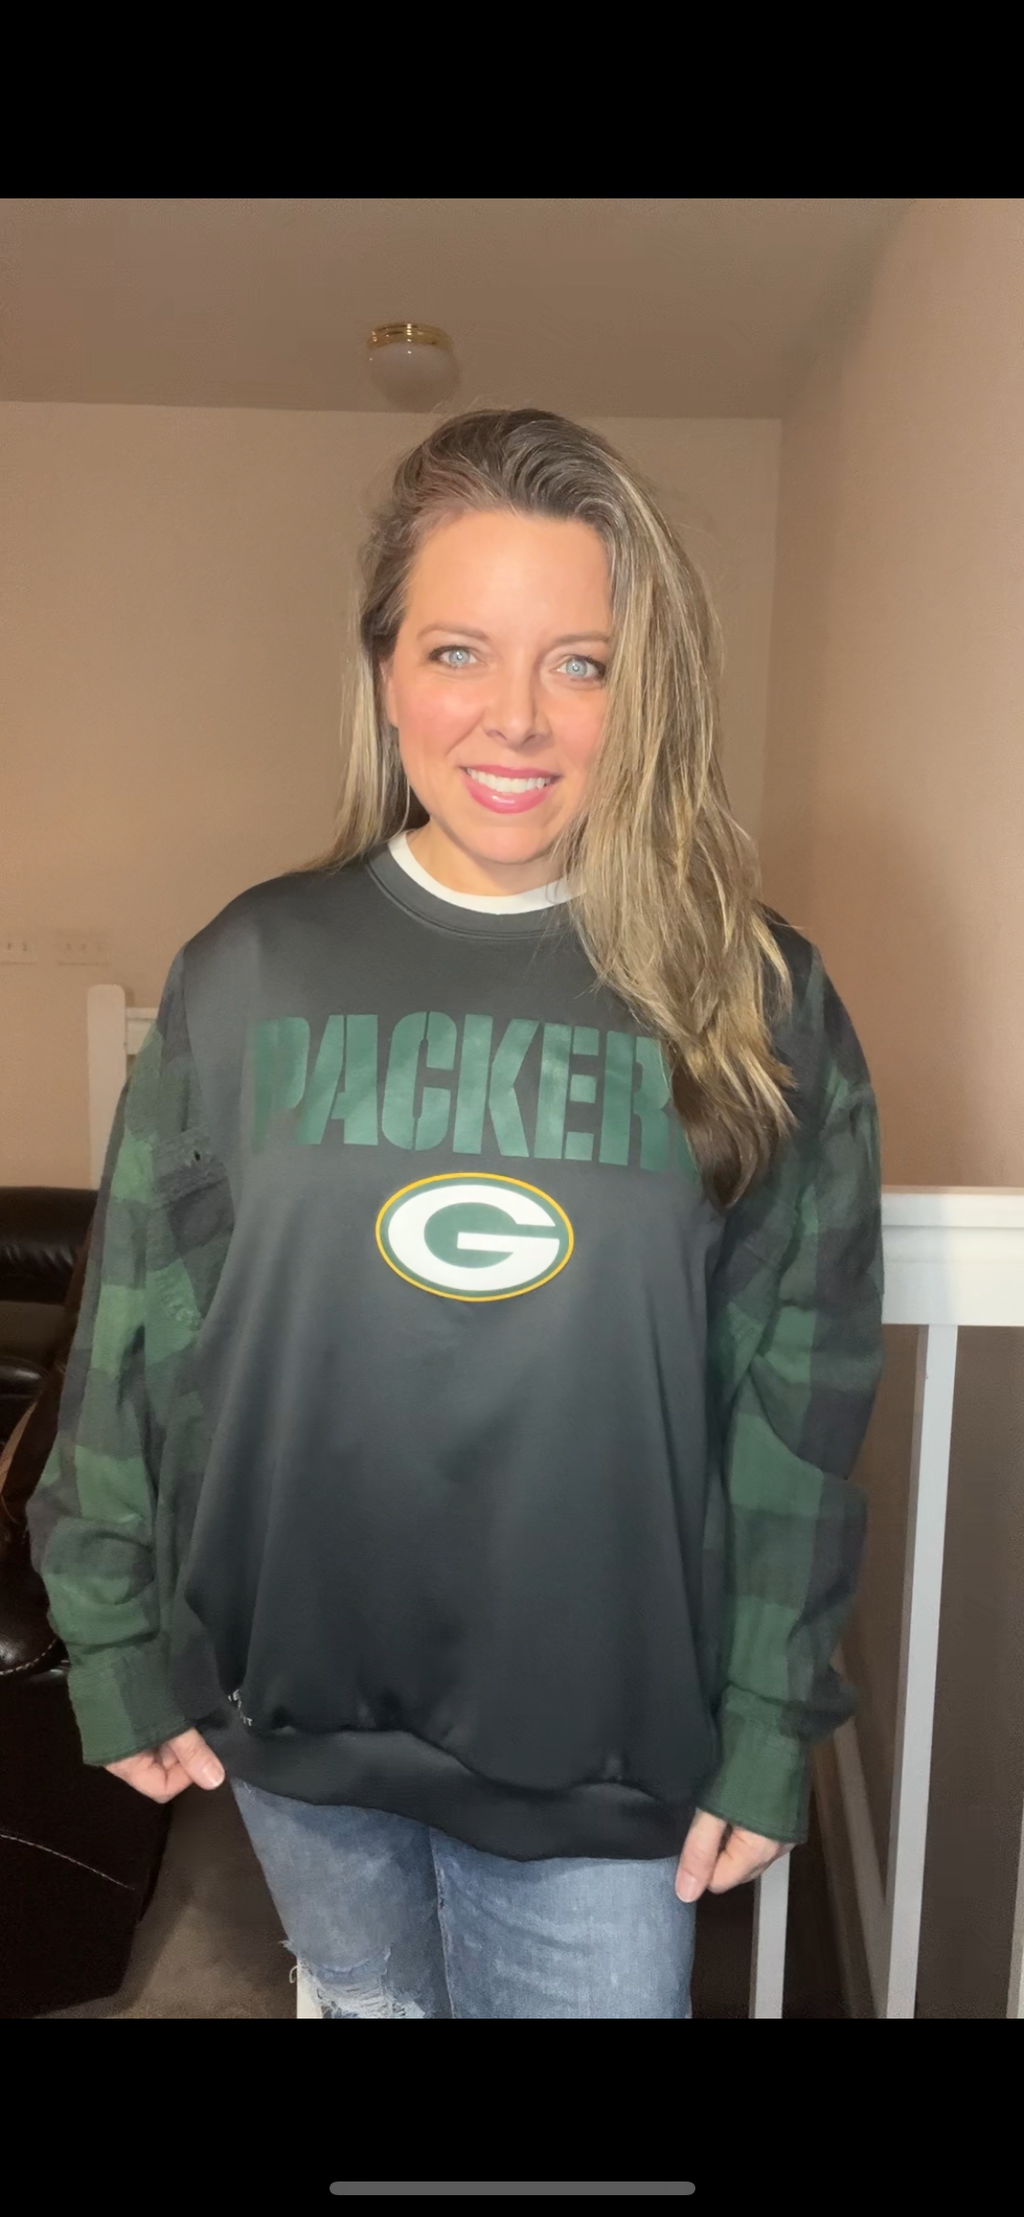 Upcycled Packers – women’s XL/1X – midweight sweatshirt with flannel sleeves￼